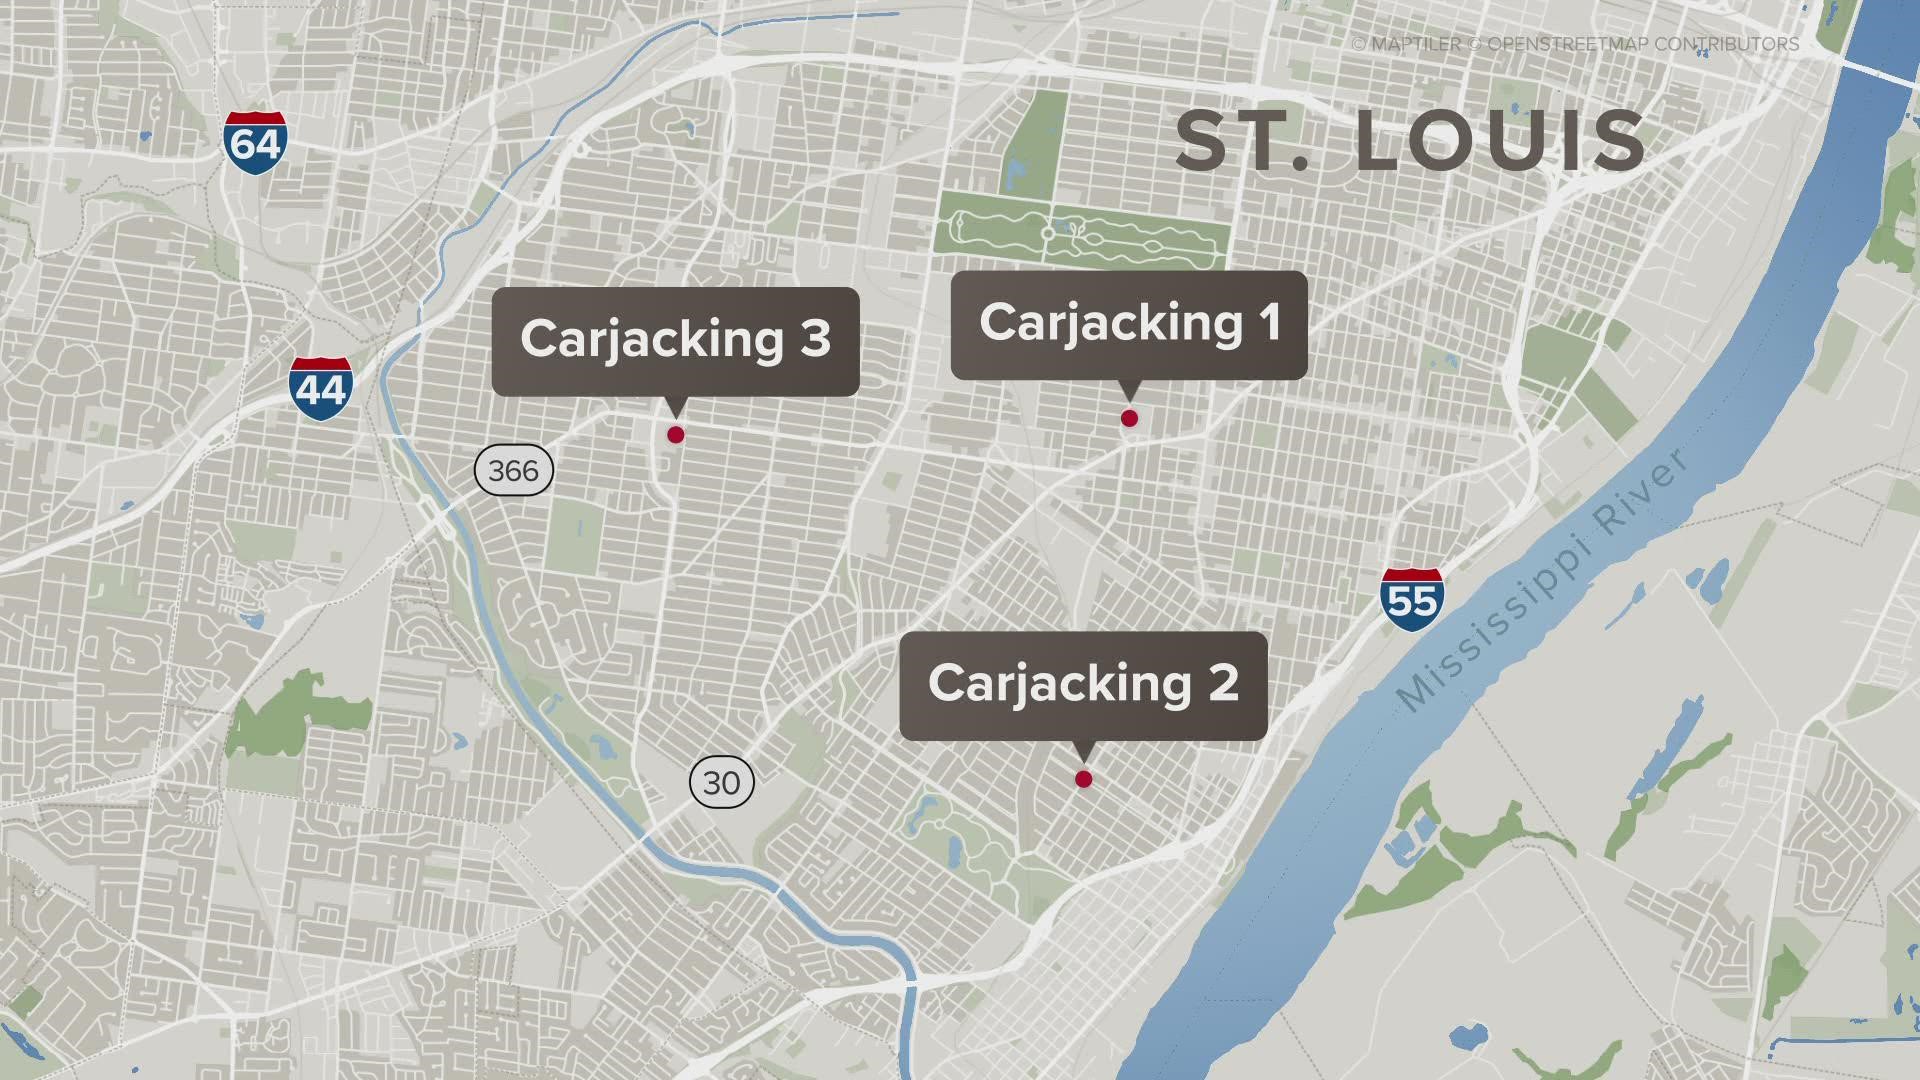 Three carjackings happened last night in south St. Louis. Police are looking for the suspects after saying they are all "possibly connected."